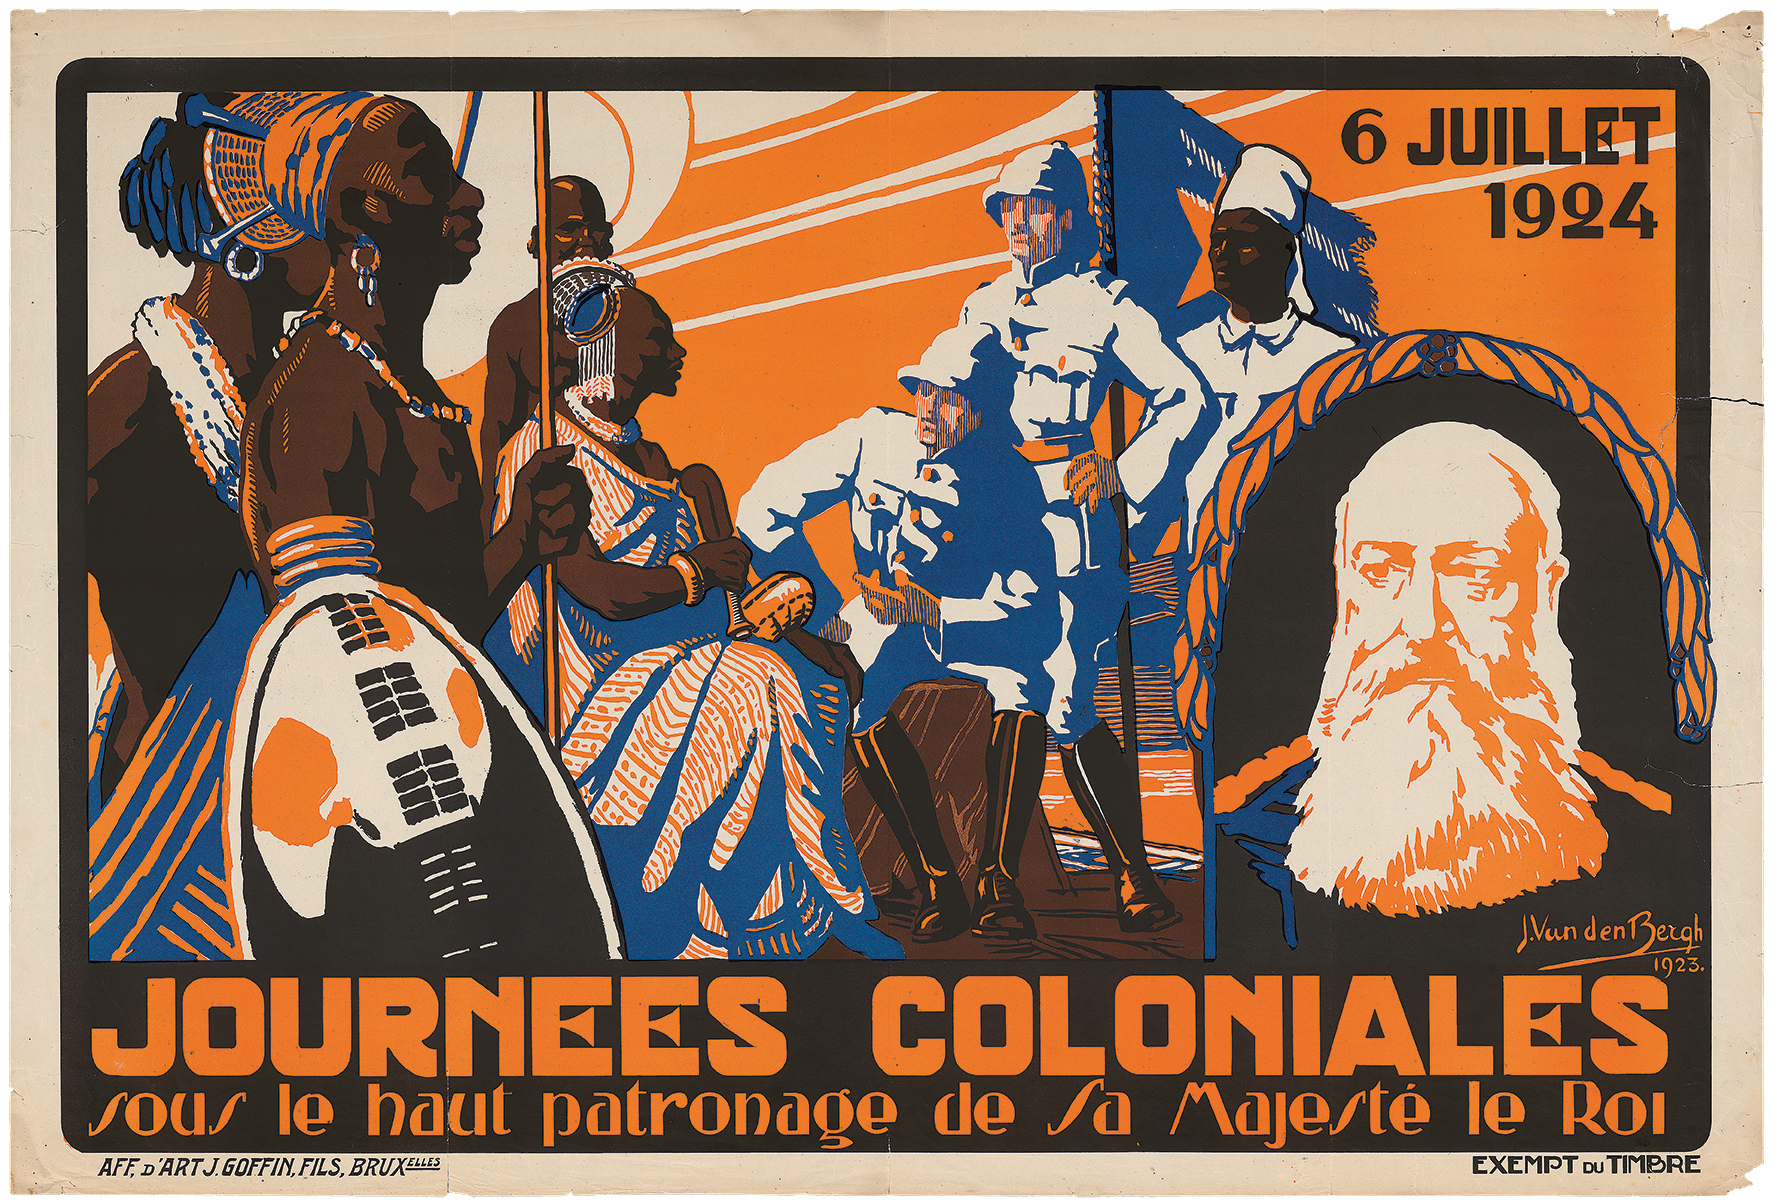 Poster for Colonial Days: Under the high patronage of His Majesty the King, 1924, courtesy Collection KMMA, Tervuren.